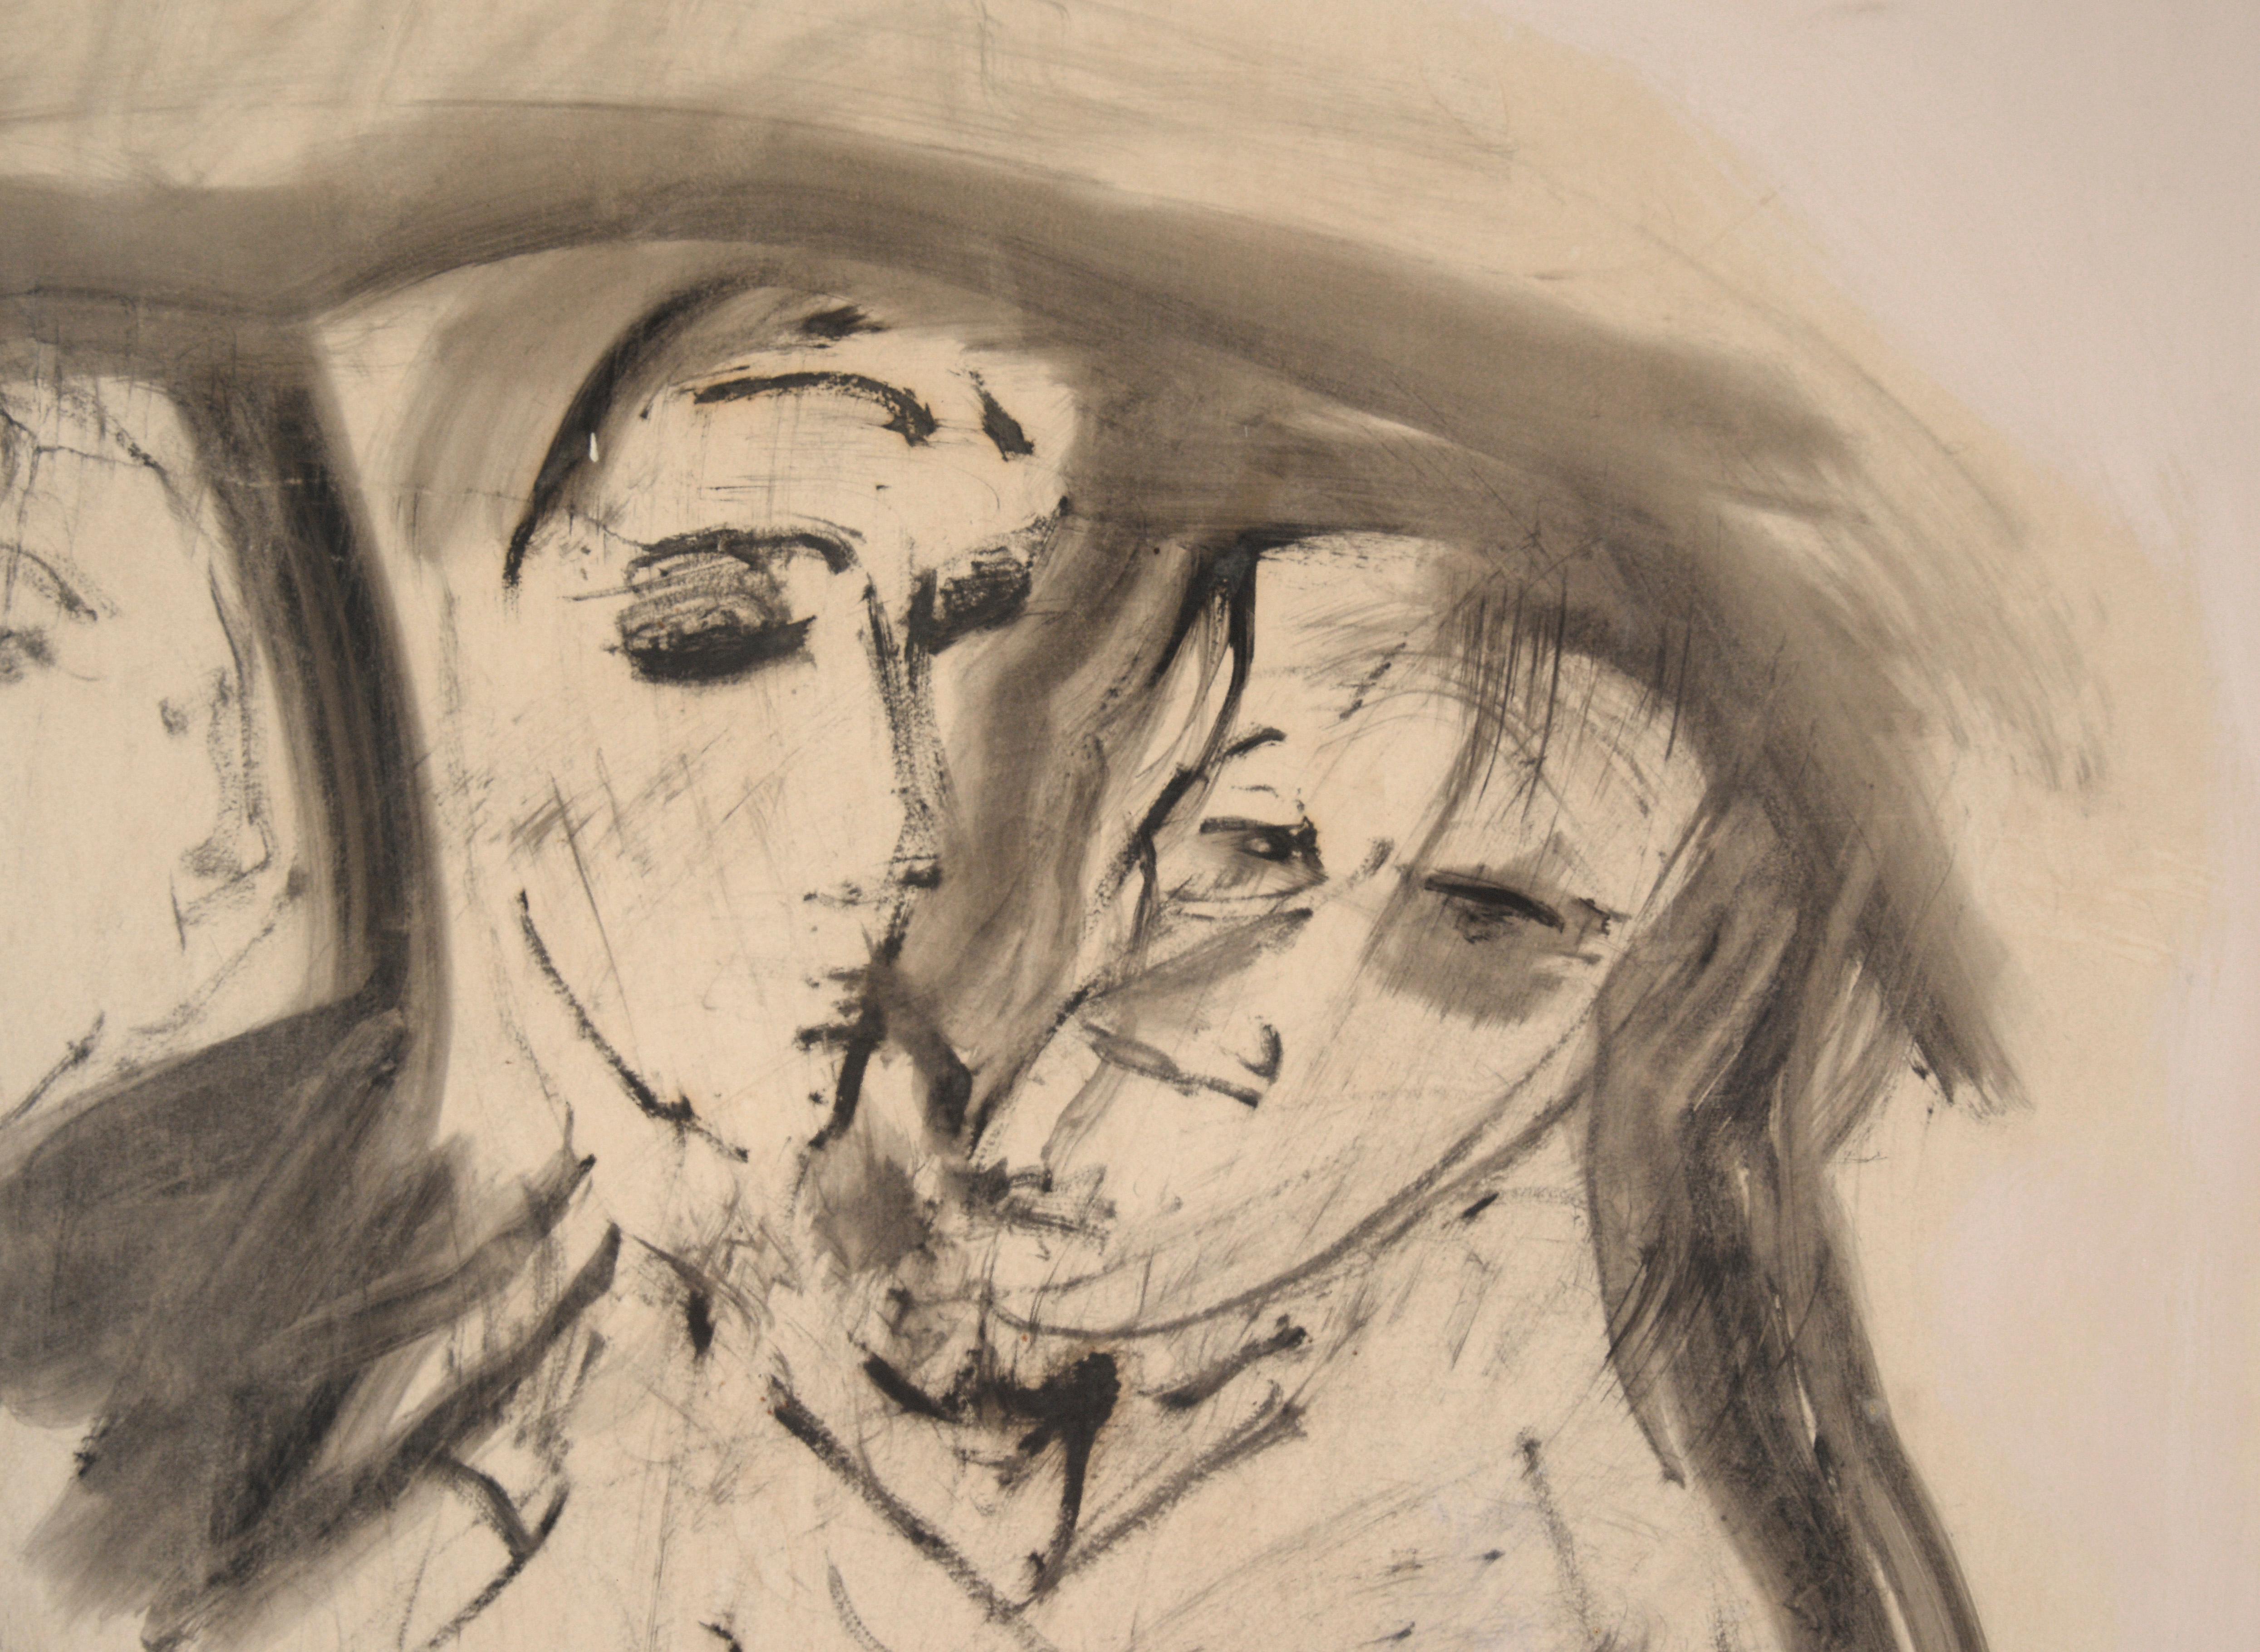 Three Figures - Black and White Illustration in Ink on Paper - Painting by Unknown